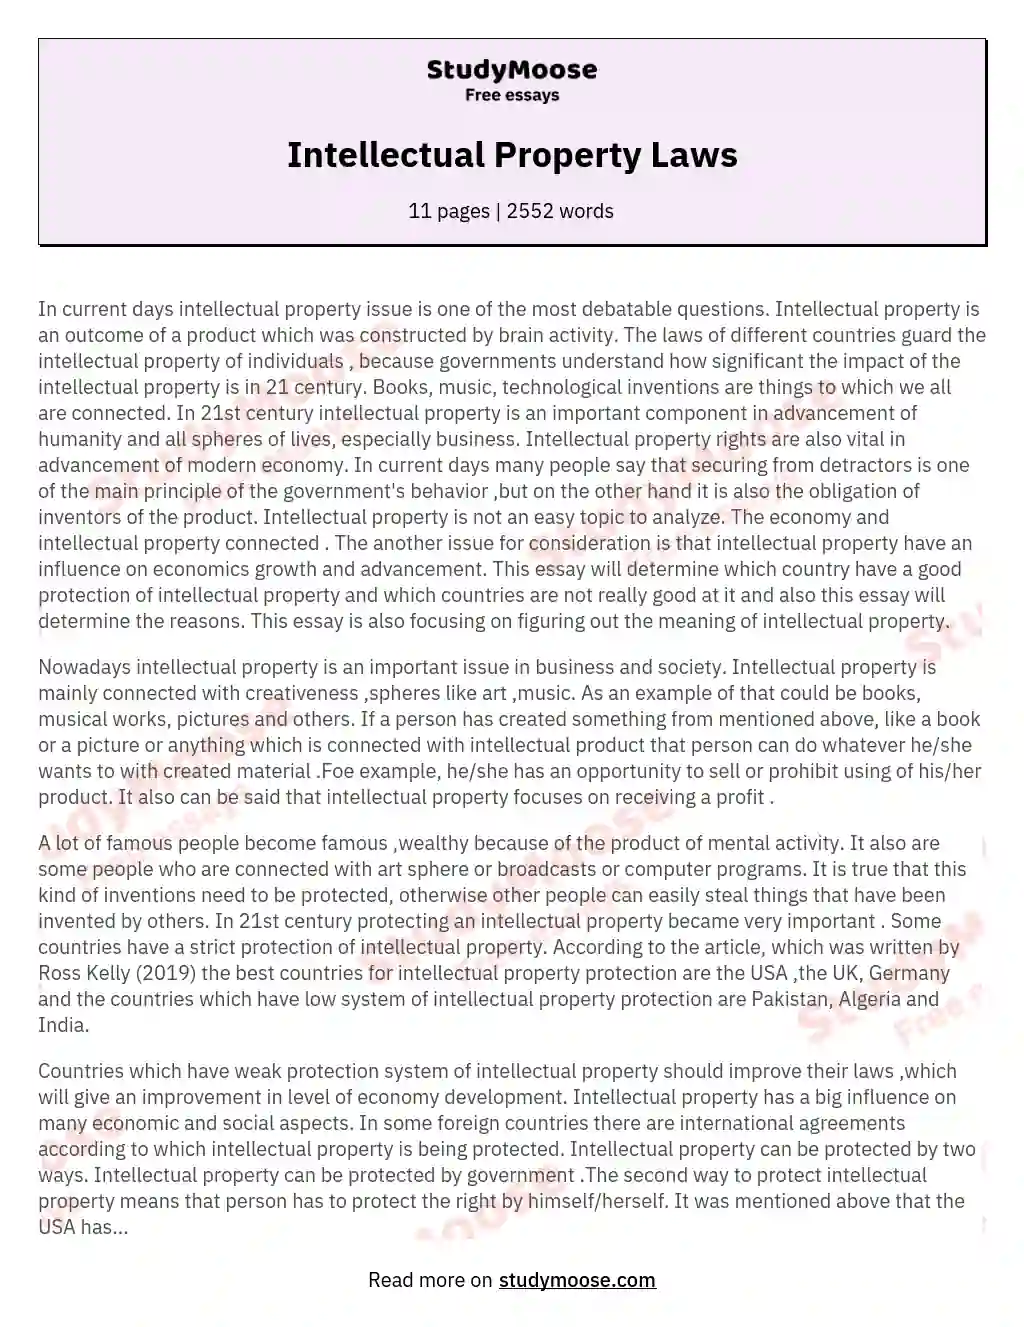 research essay on intellectual property rights